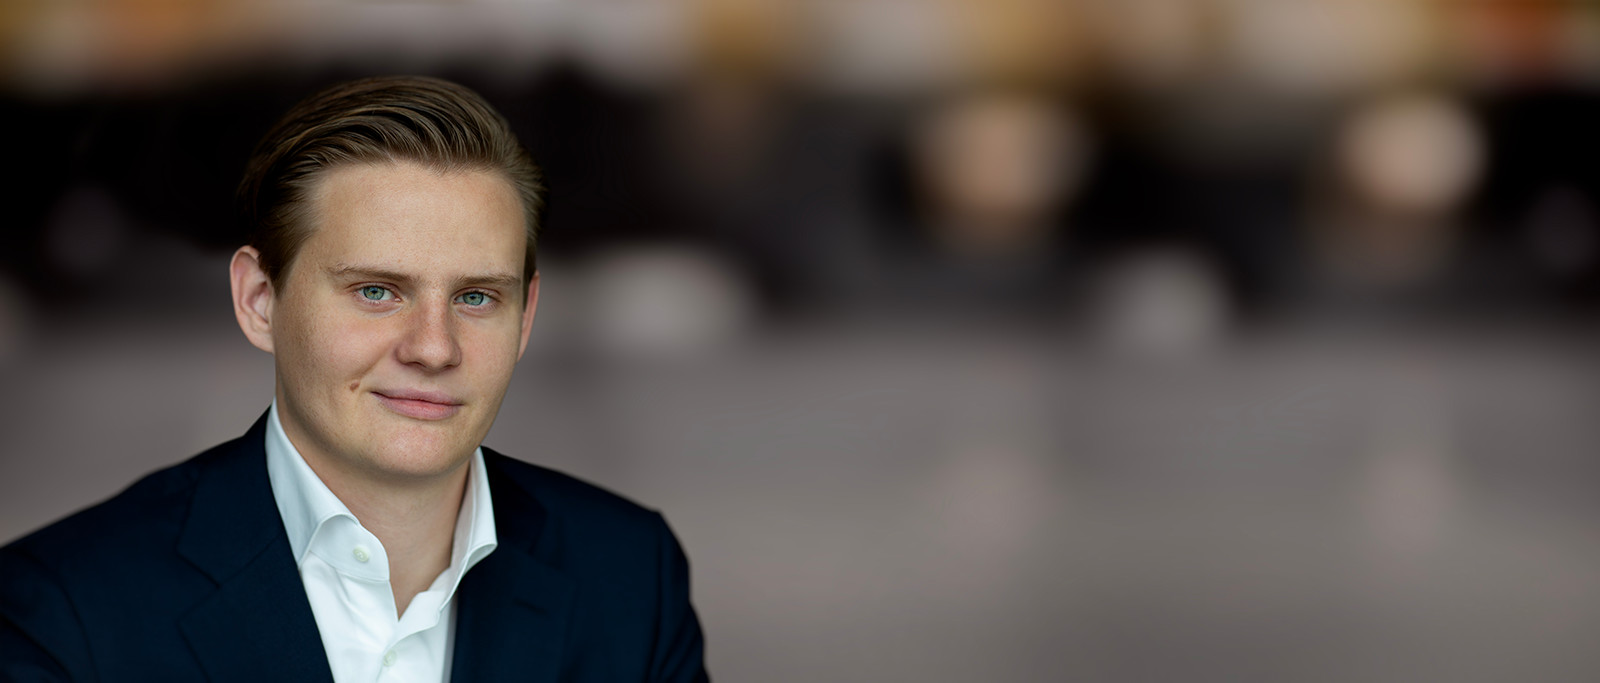 Laurits Lund legal trainee hos Lundgrens